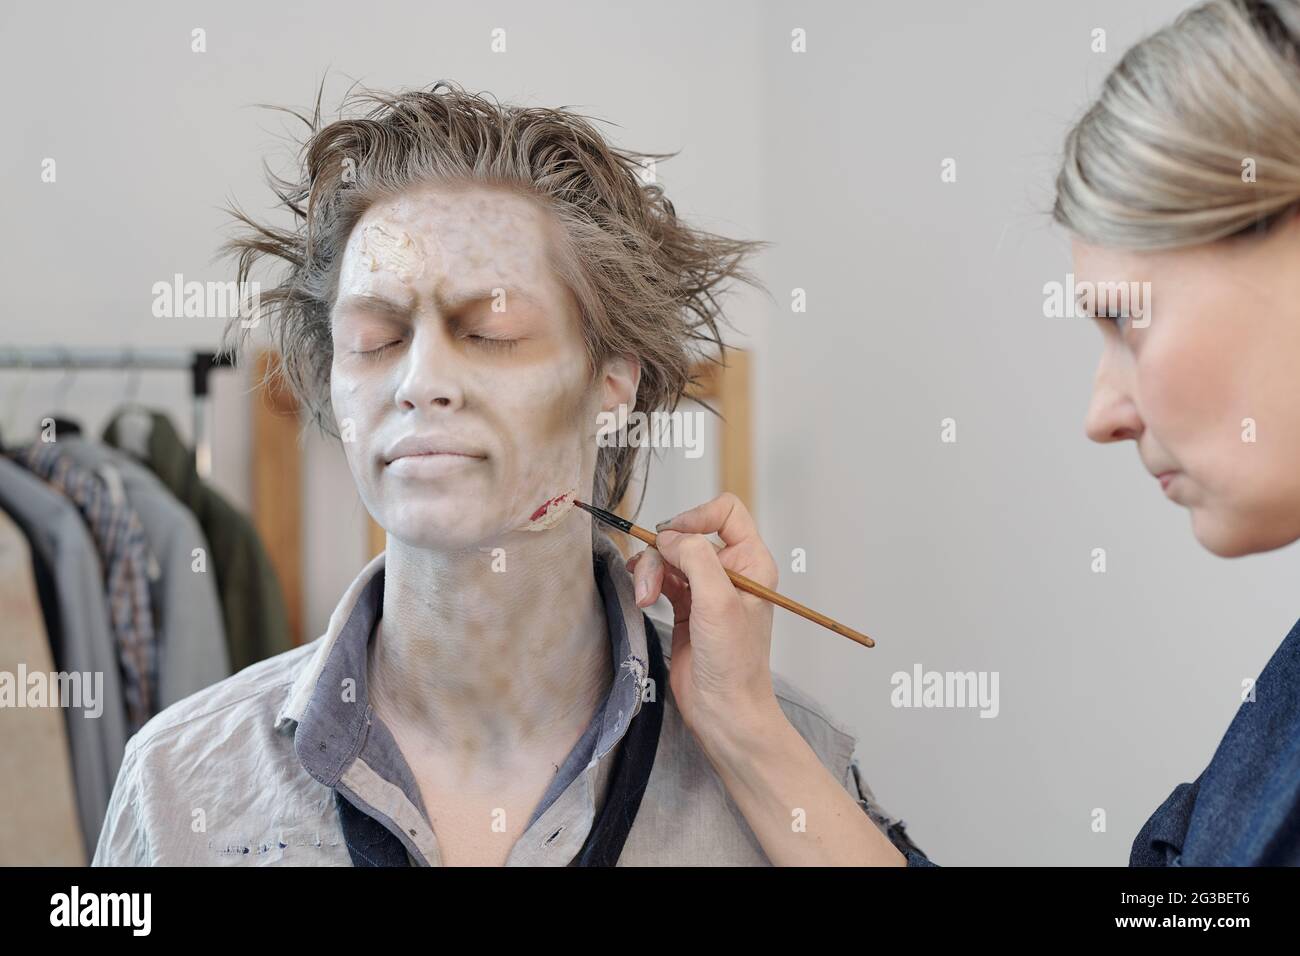 Stage makeup artist with paintbrush painting wound on face of young man  Stock Photo - Alamy